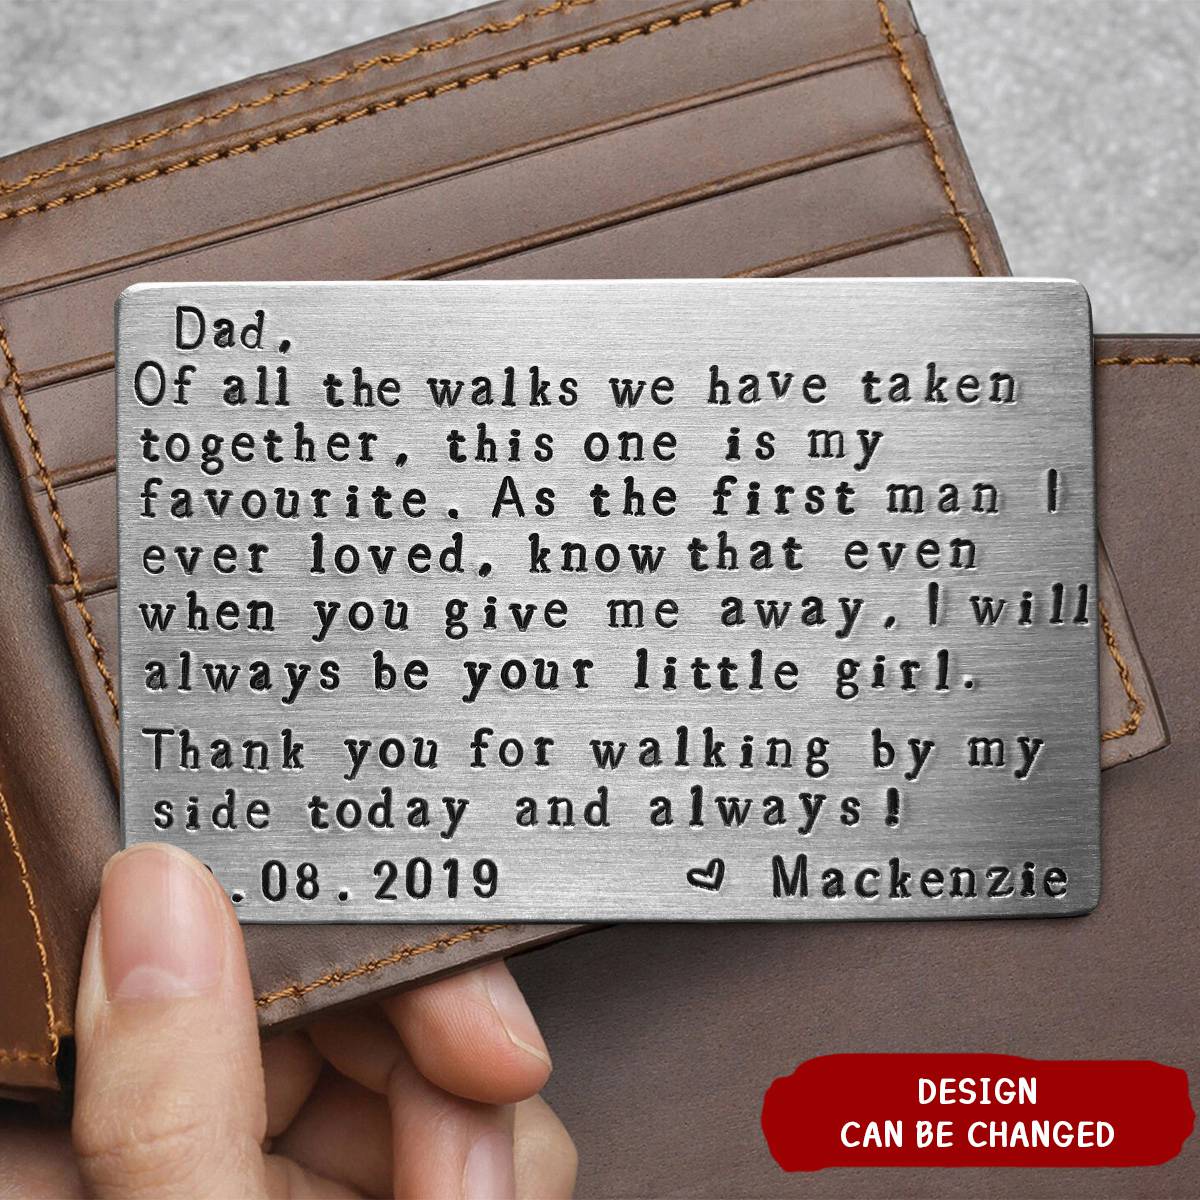 Personalized Aluminum Wallet Card - Gift for Father of the Bride - Wedding Gift from Daughter